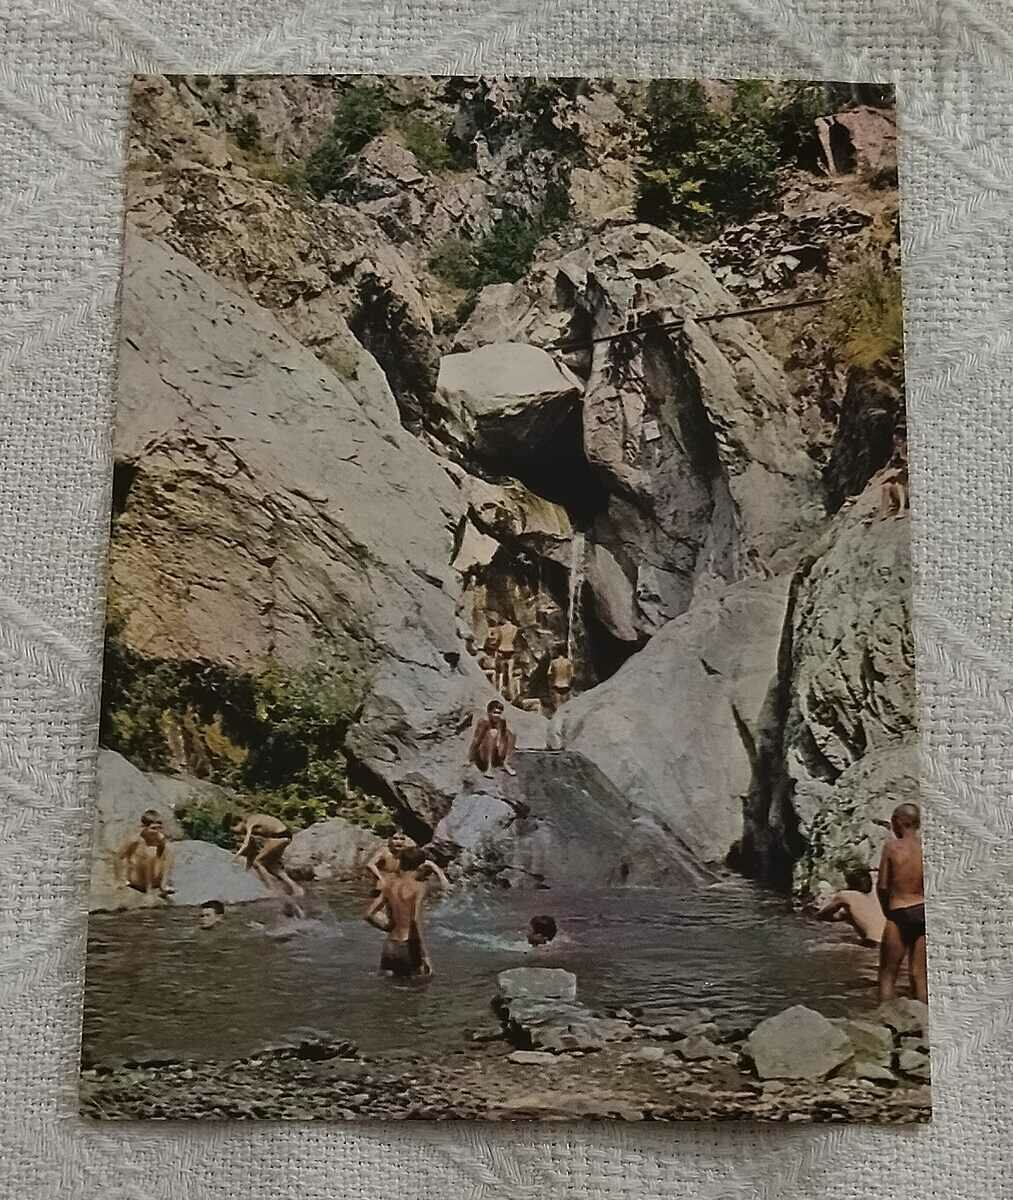 KARLOVO WATERFALL ON THE OLD RIVER 1970 P.K.